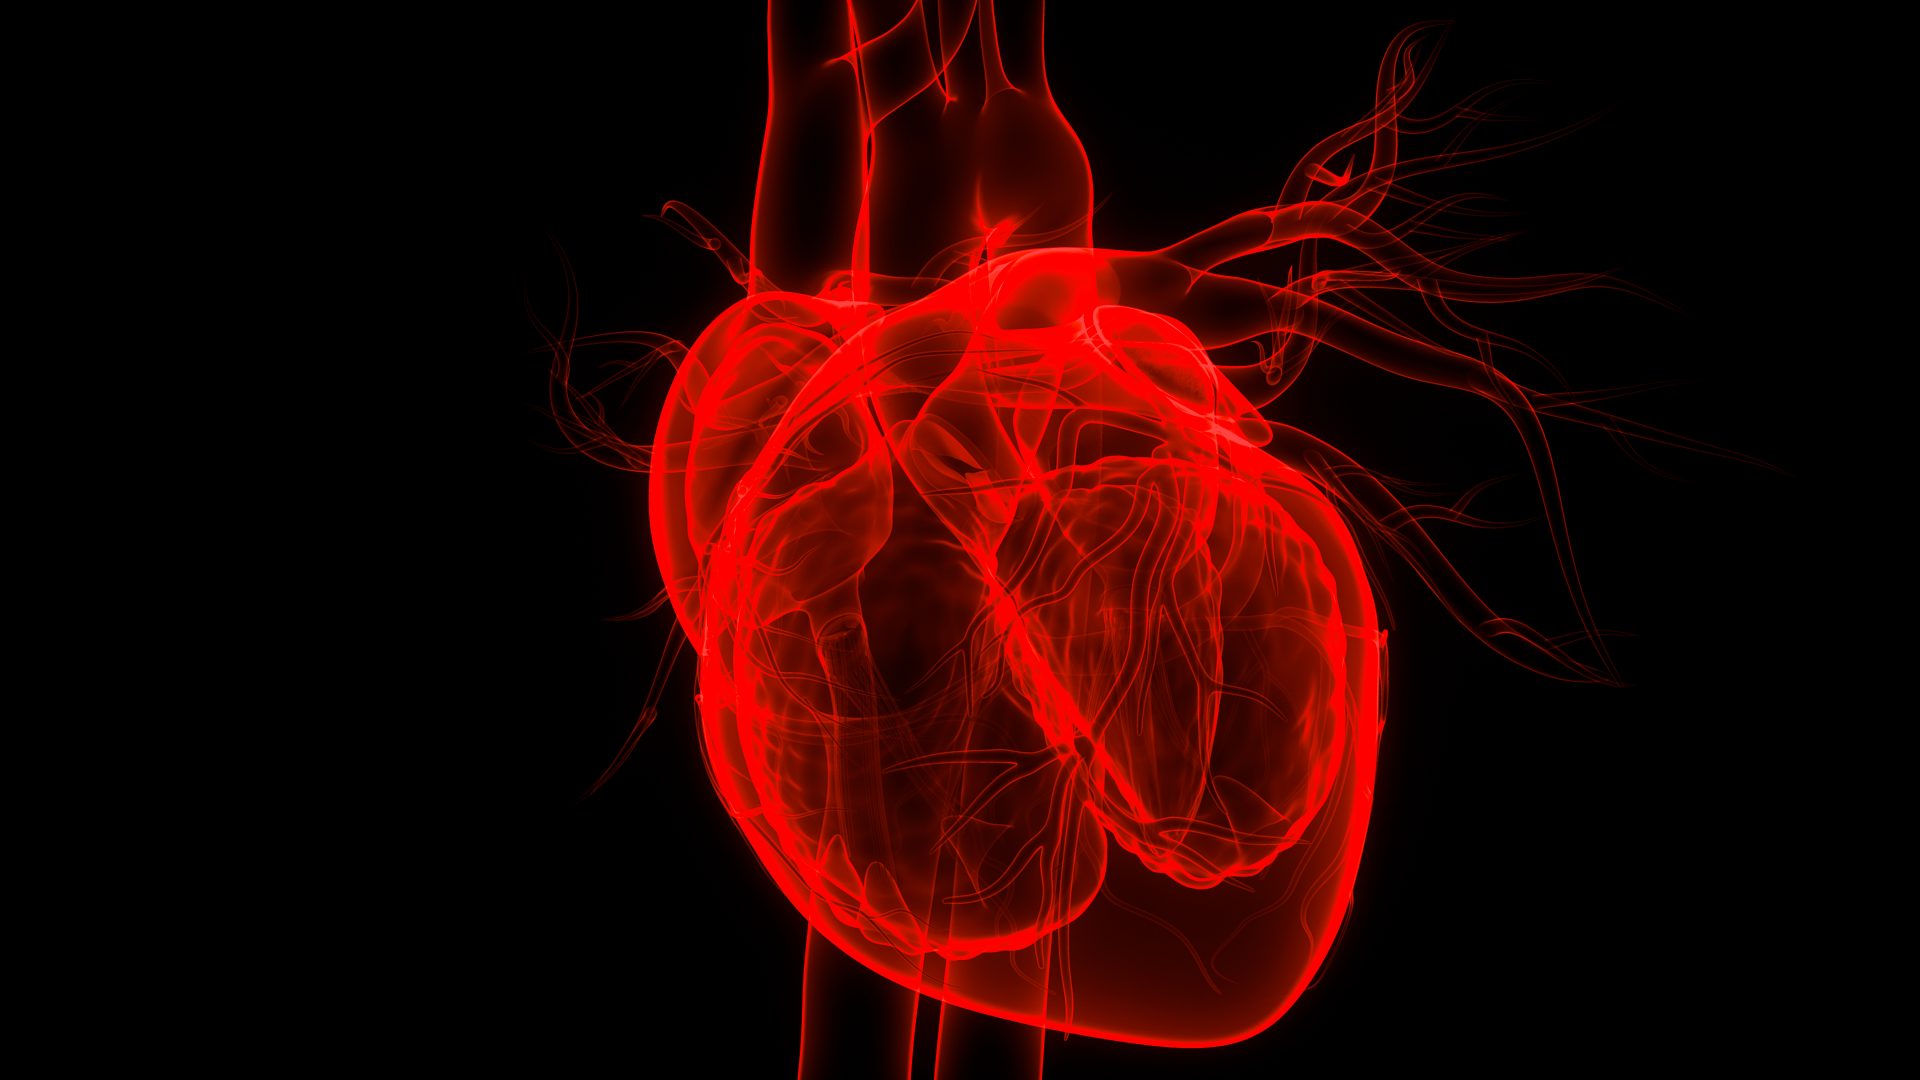 Devastating heart condition can be reversed, study shows for the first time